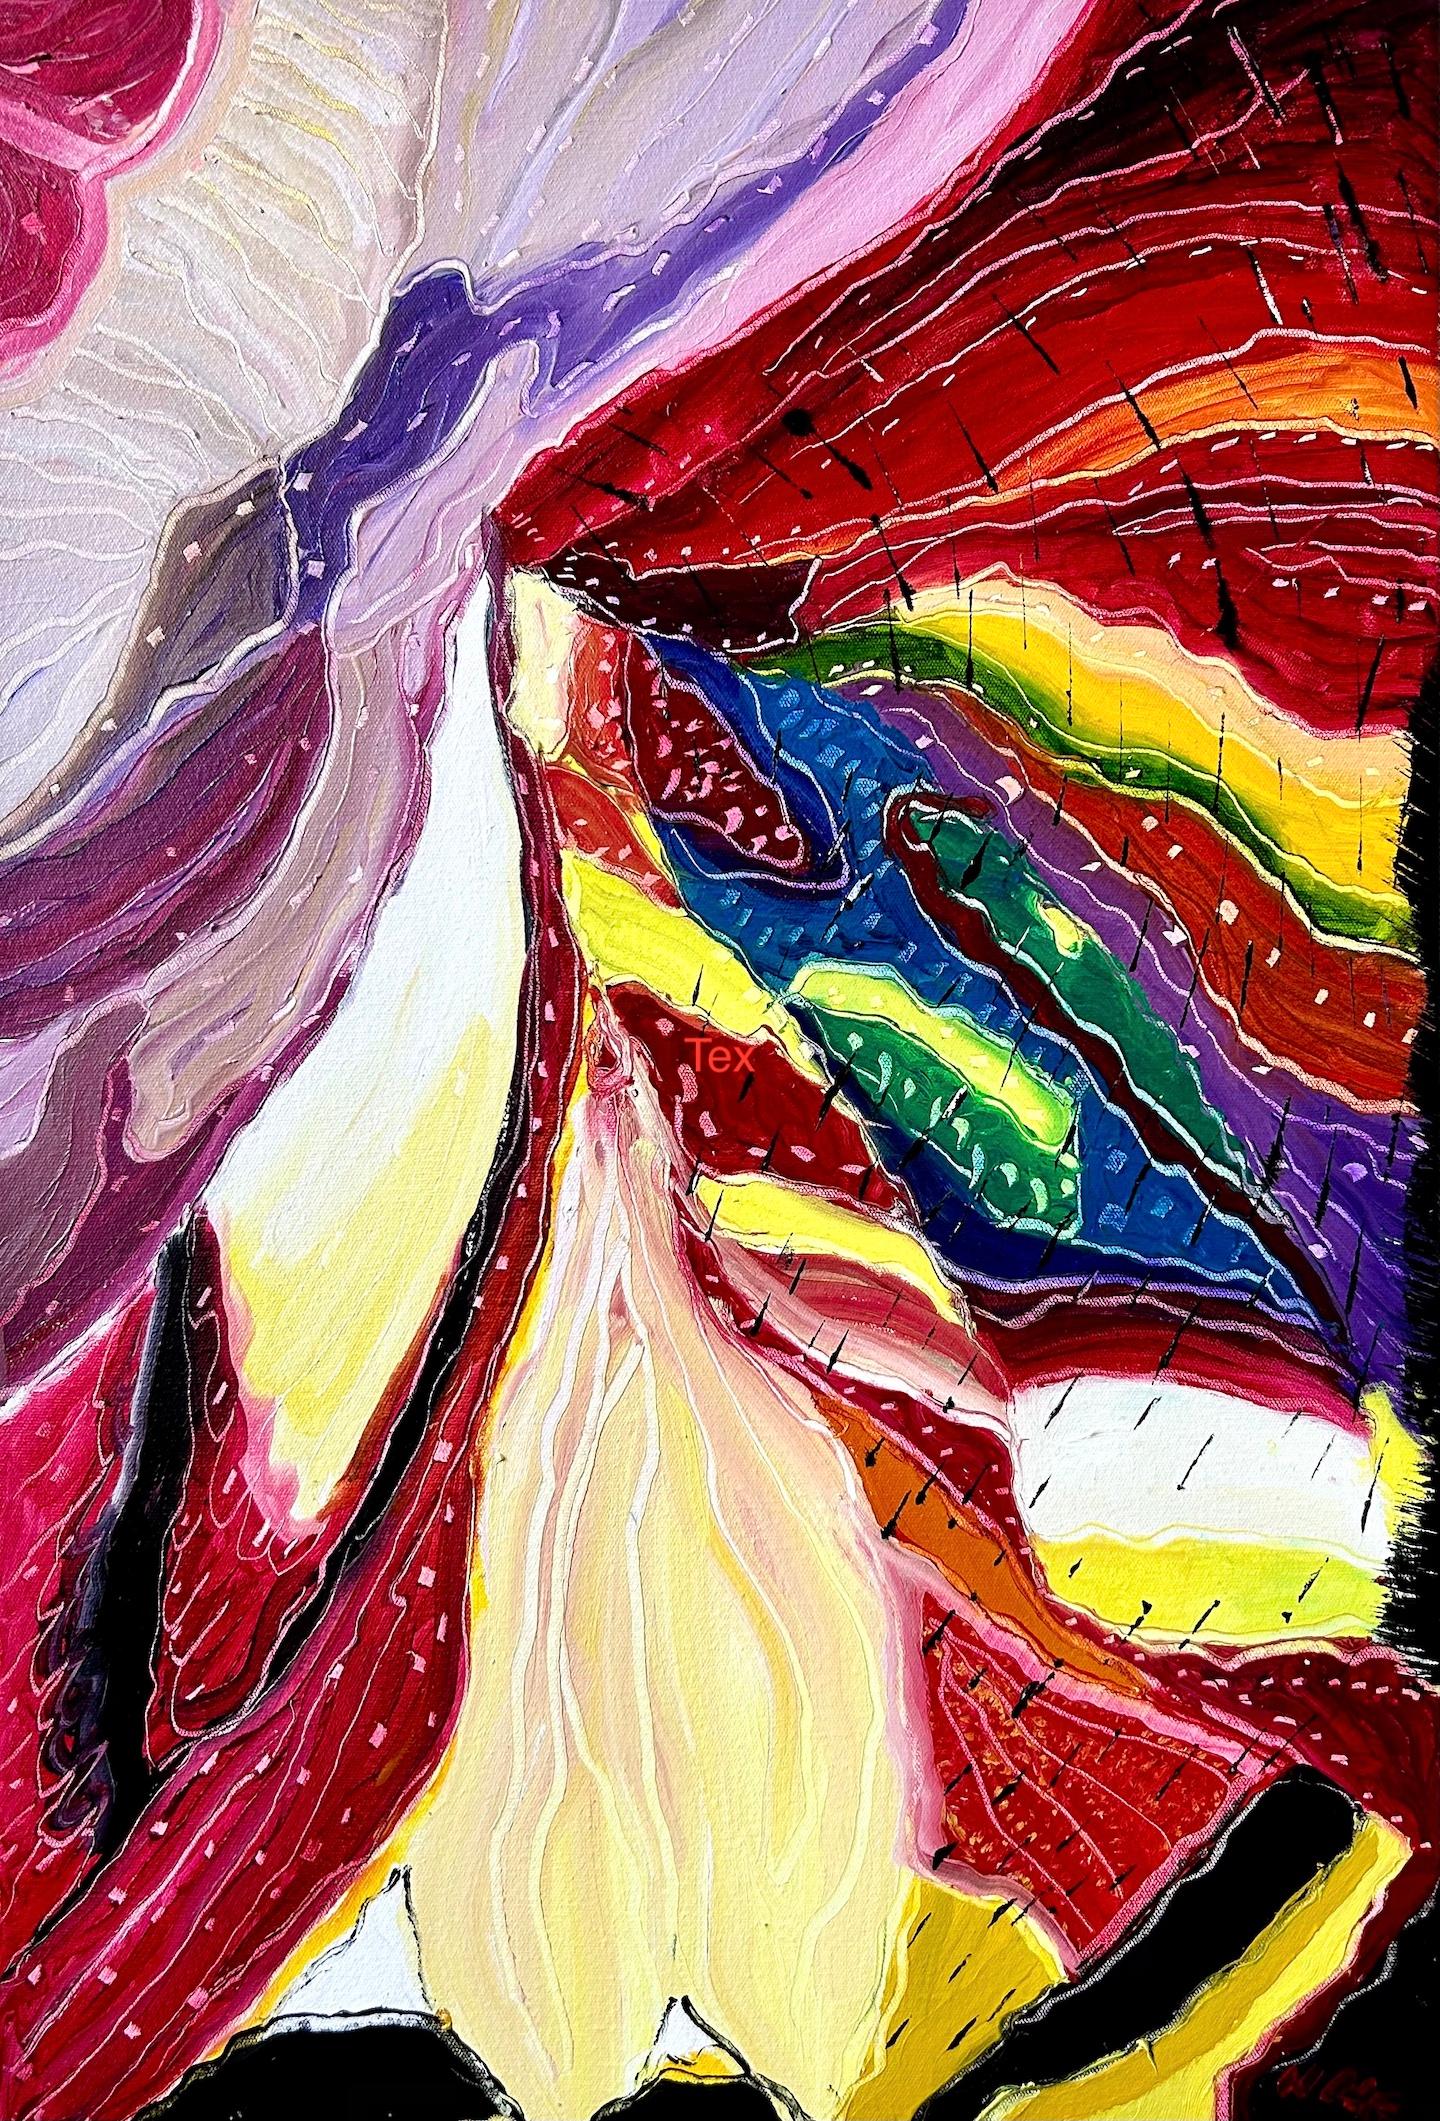 "Fiery Glacier", abstract, reds, purples, oranges, blues, oil painting - Painting by Nan Hass Feldman